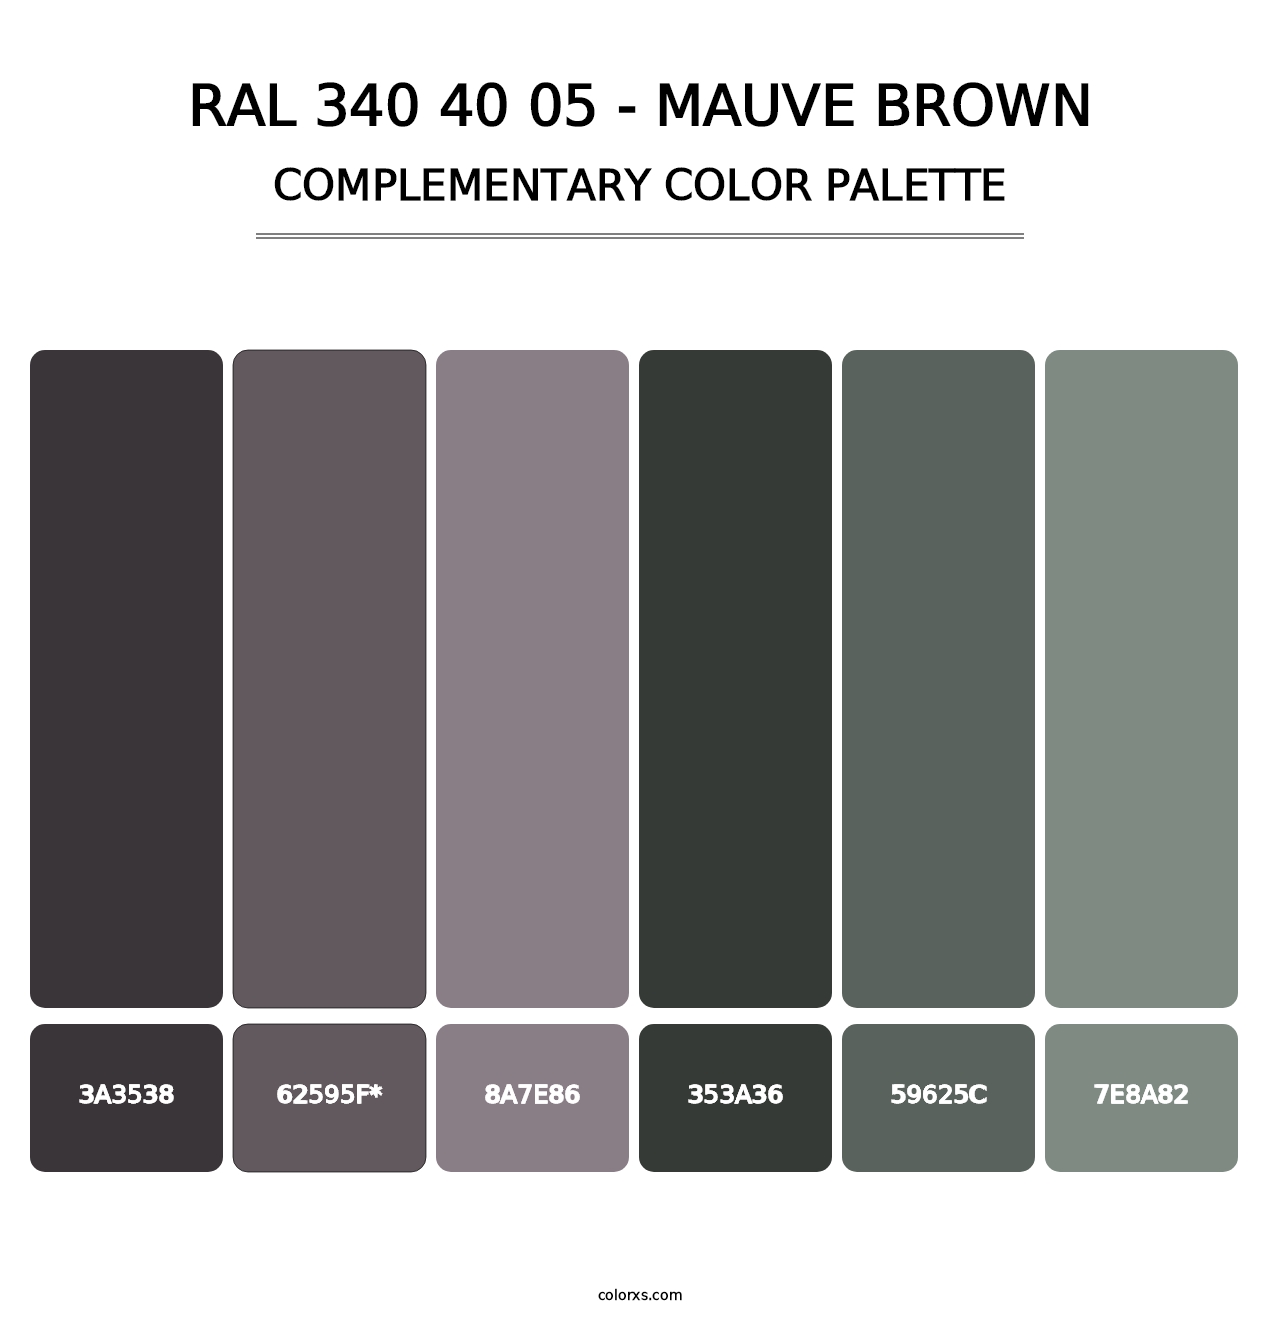 RAL 340 40 05 - Mauve Brown - Complementary Color Palette